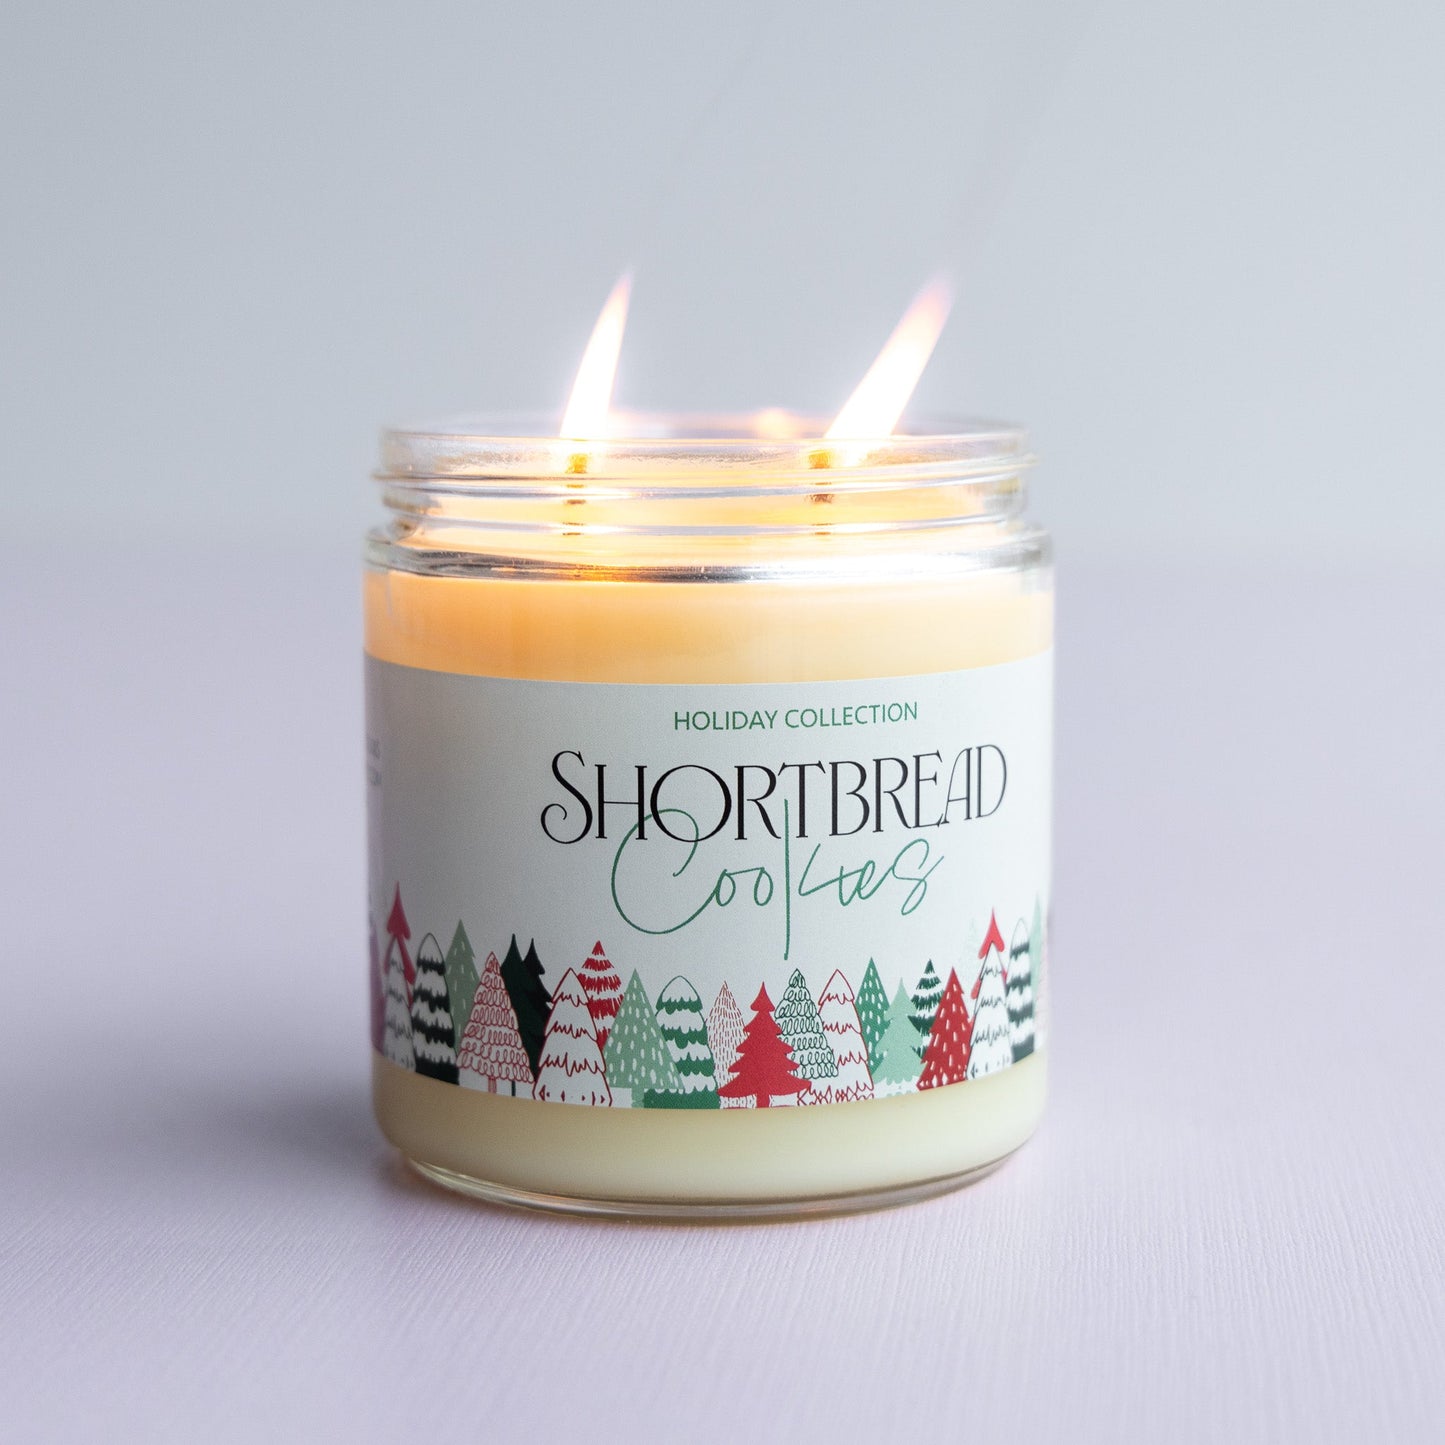 Shortbread Cookies Candle